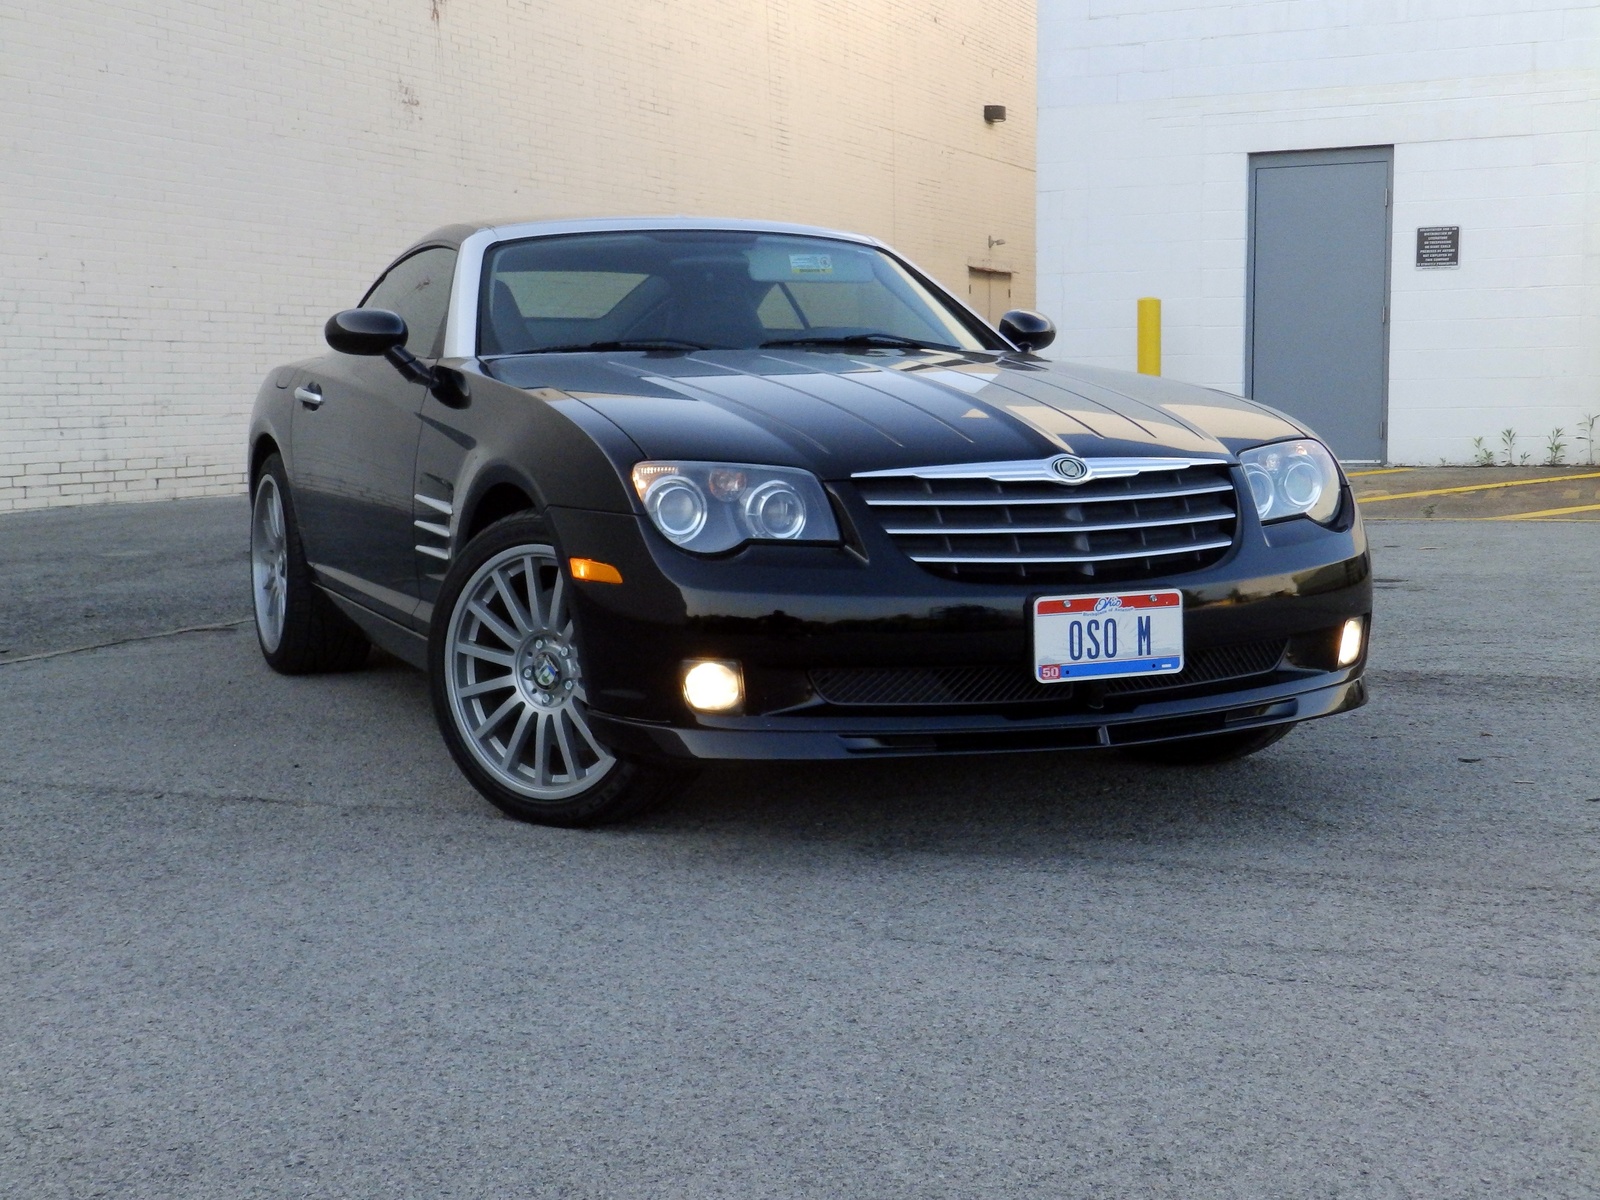 Chrysler crossfire second hand price #4